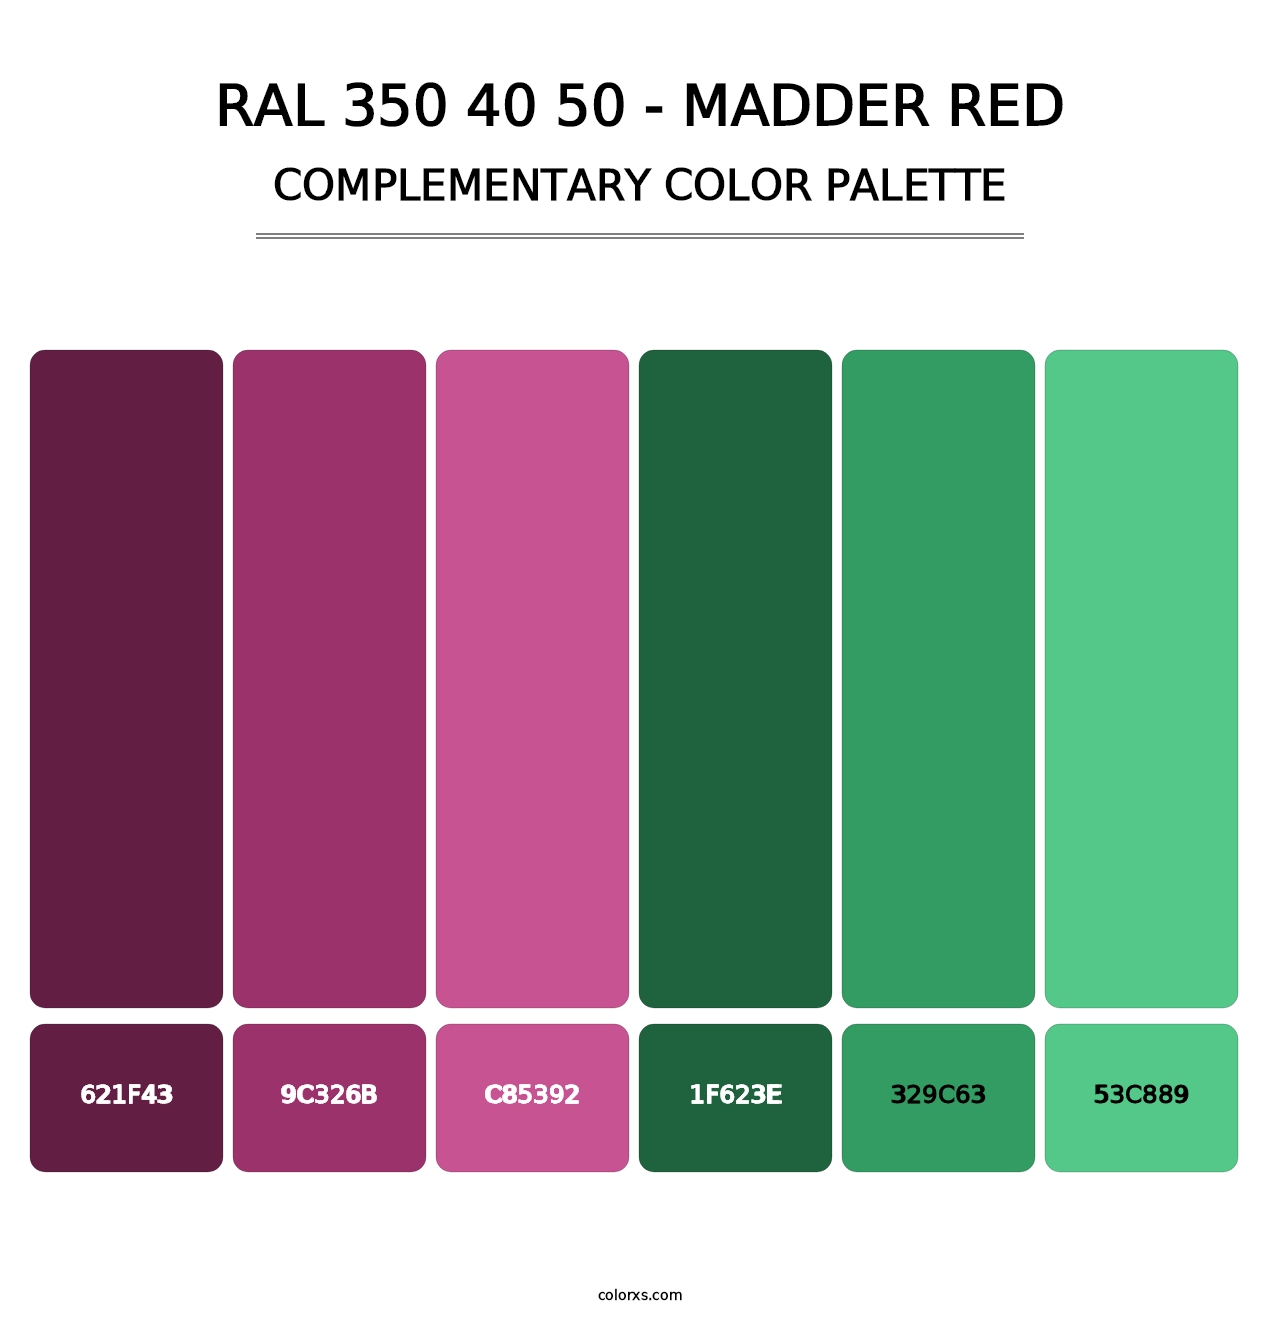 RAL 350 40 50 - Madder Red - Complementary Color Palette